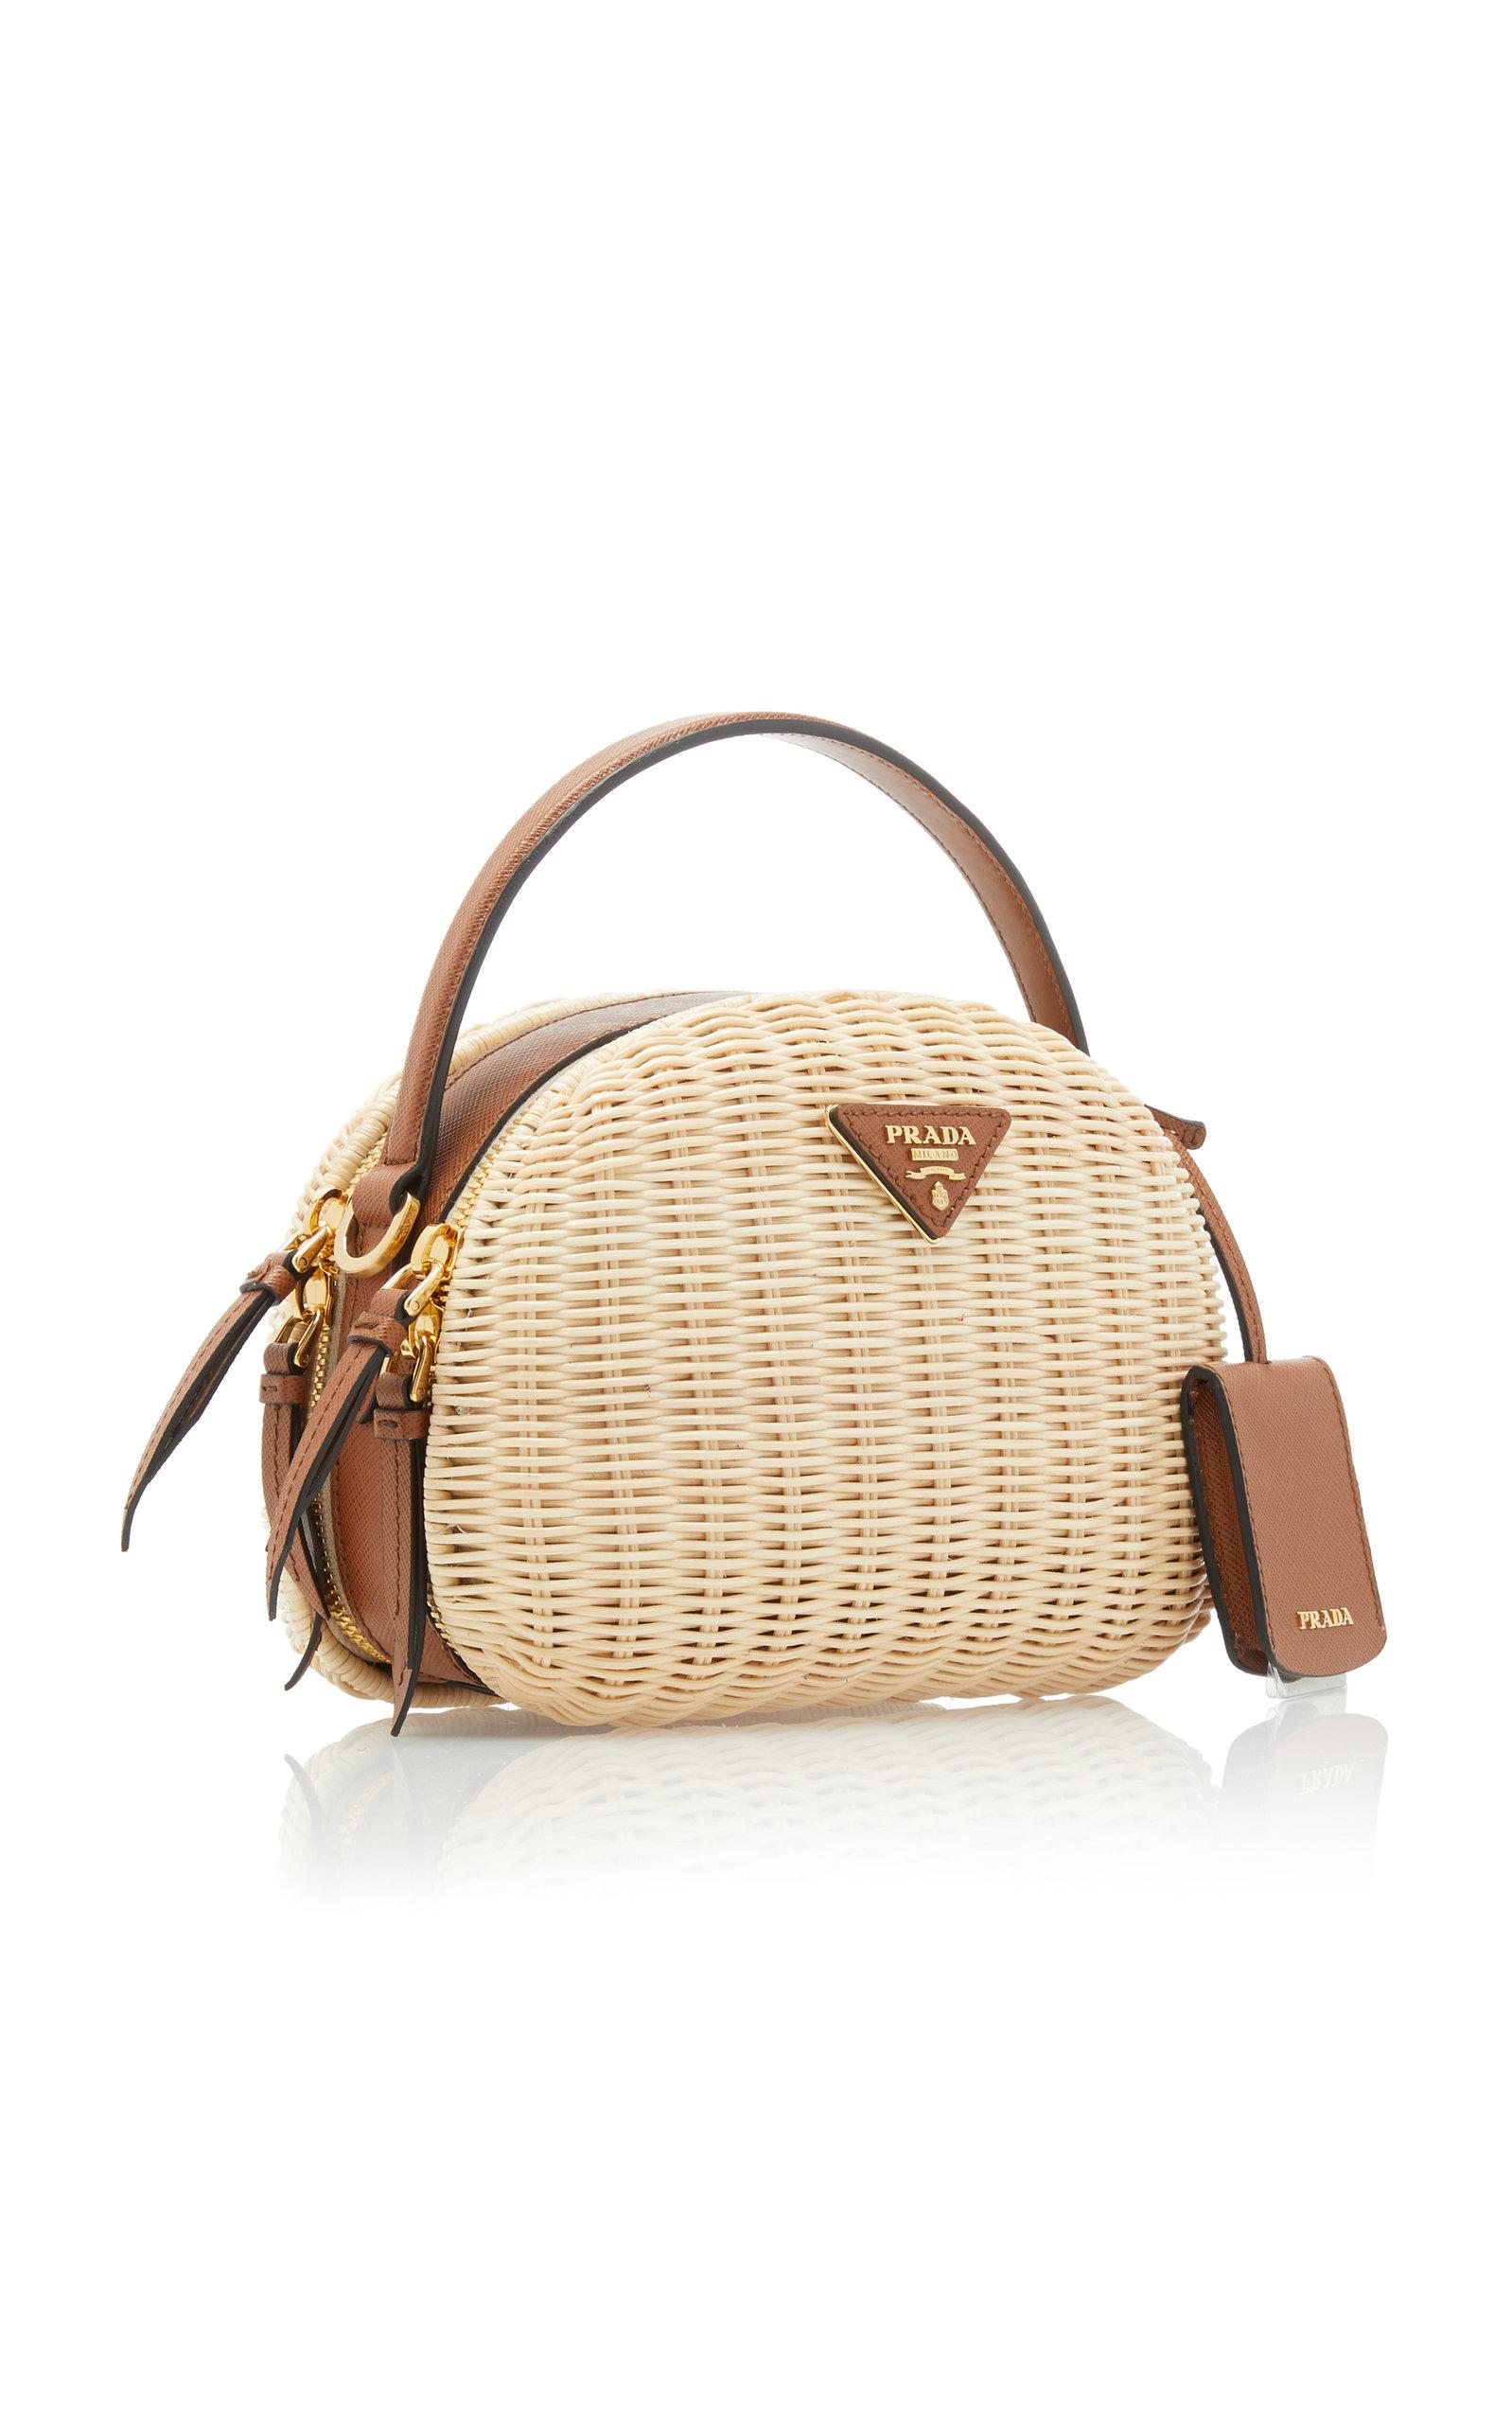 Prada Wicker And Saffiano Leather Shoulder Bag in Natural | Lyst